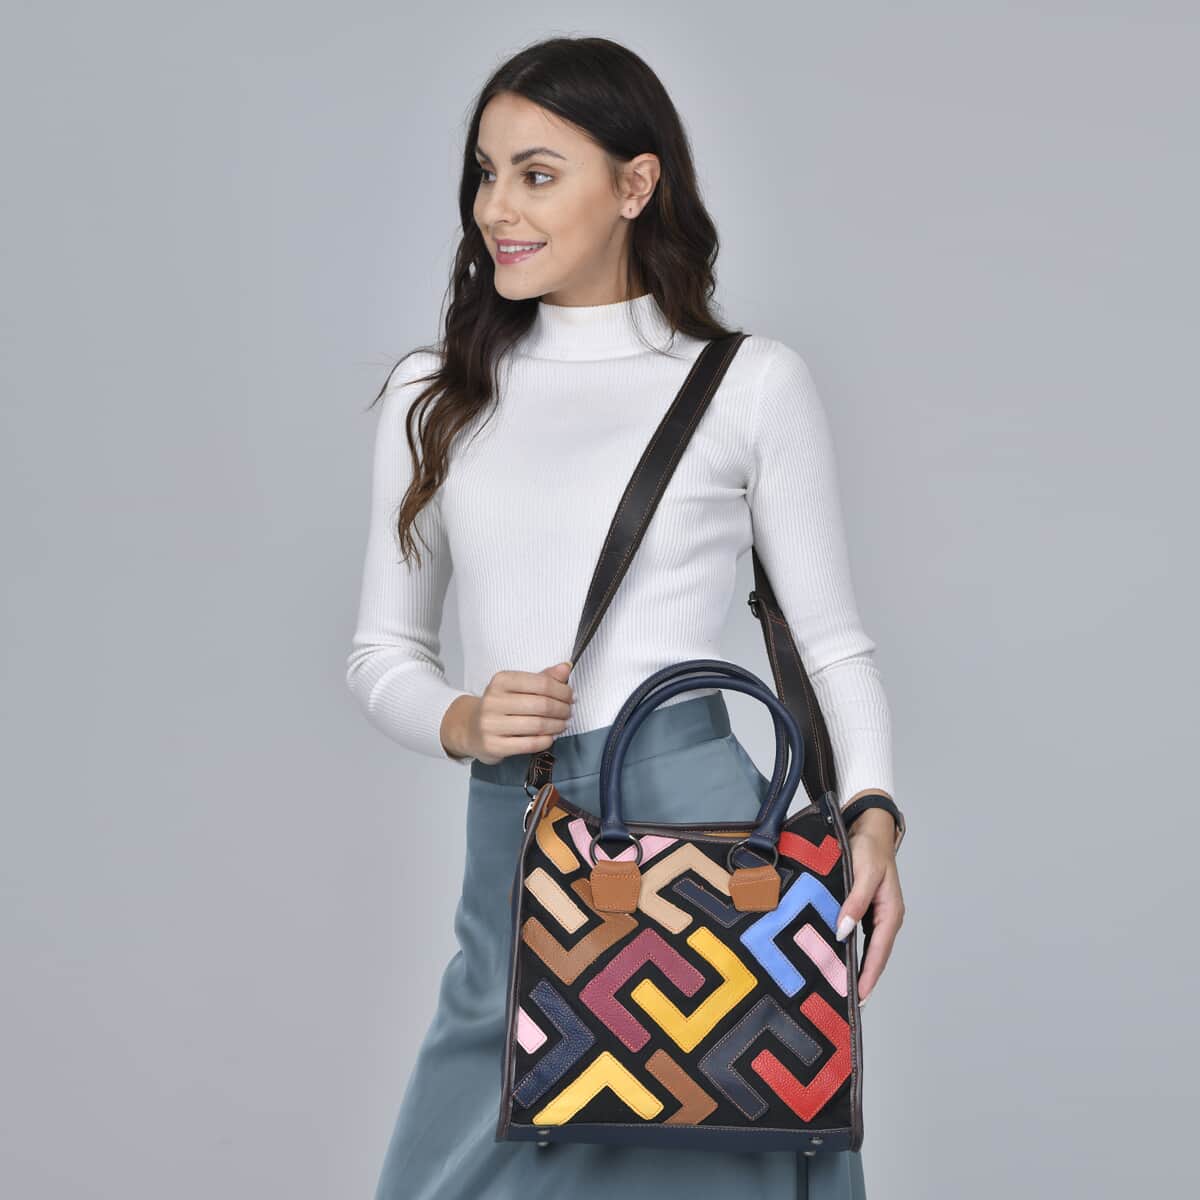 CHAOS BY ELSIE Multi Solid Color Fret Pattern Genuine Leather Convertible Tote Bag with Handle and Shoulder Strap (12.6"x5.12:x11.81") image number 1